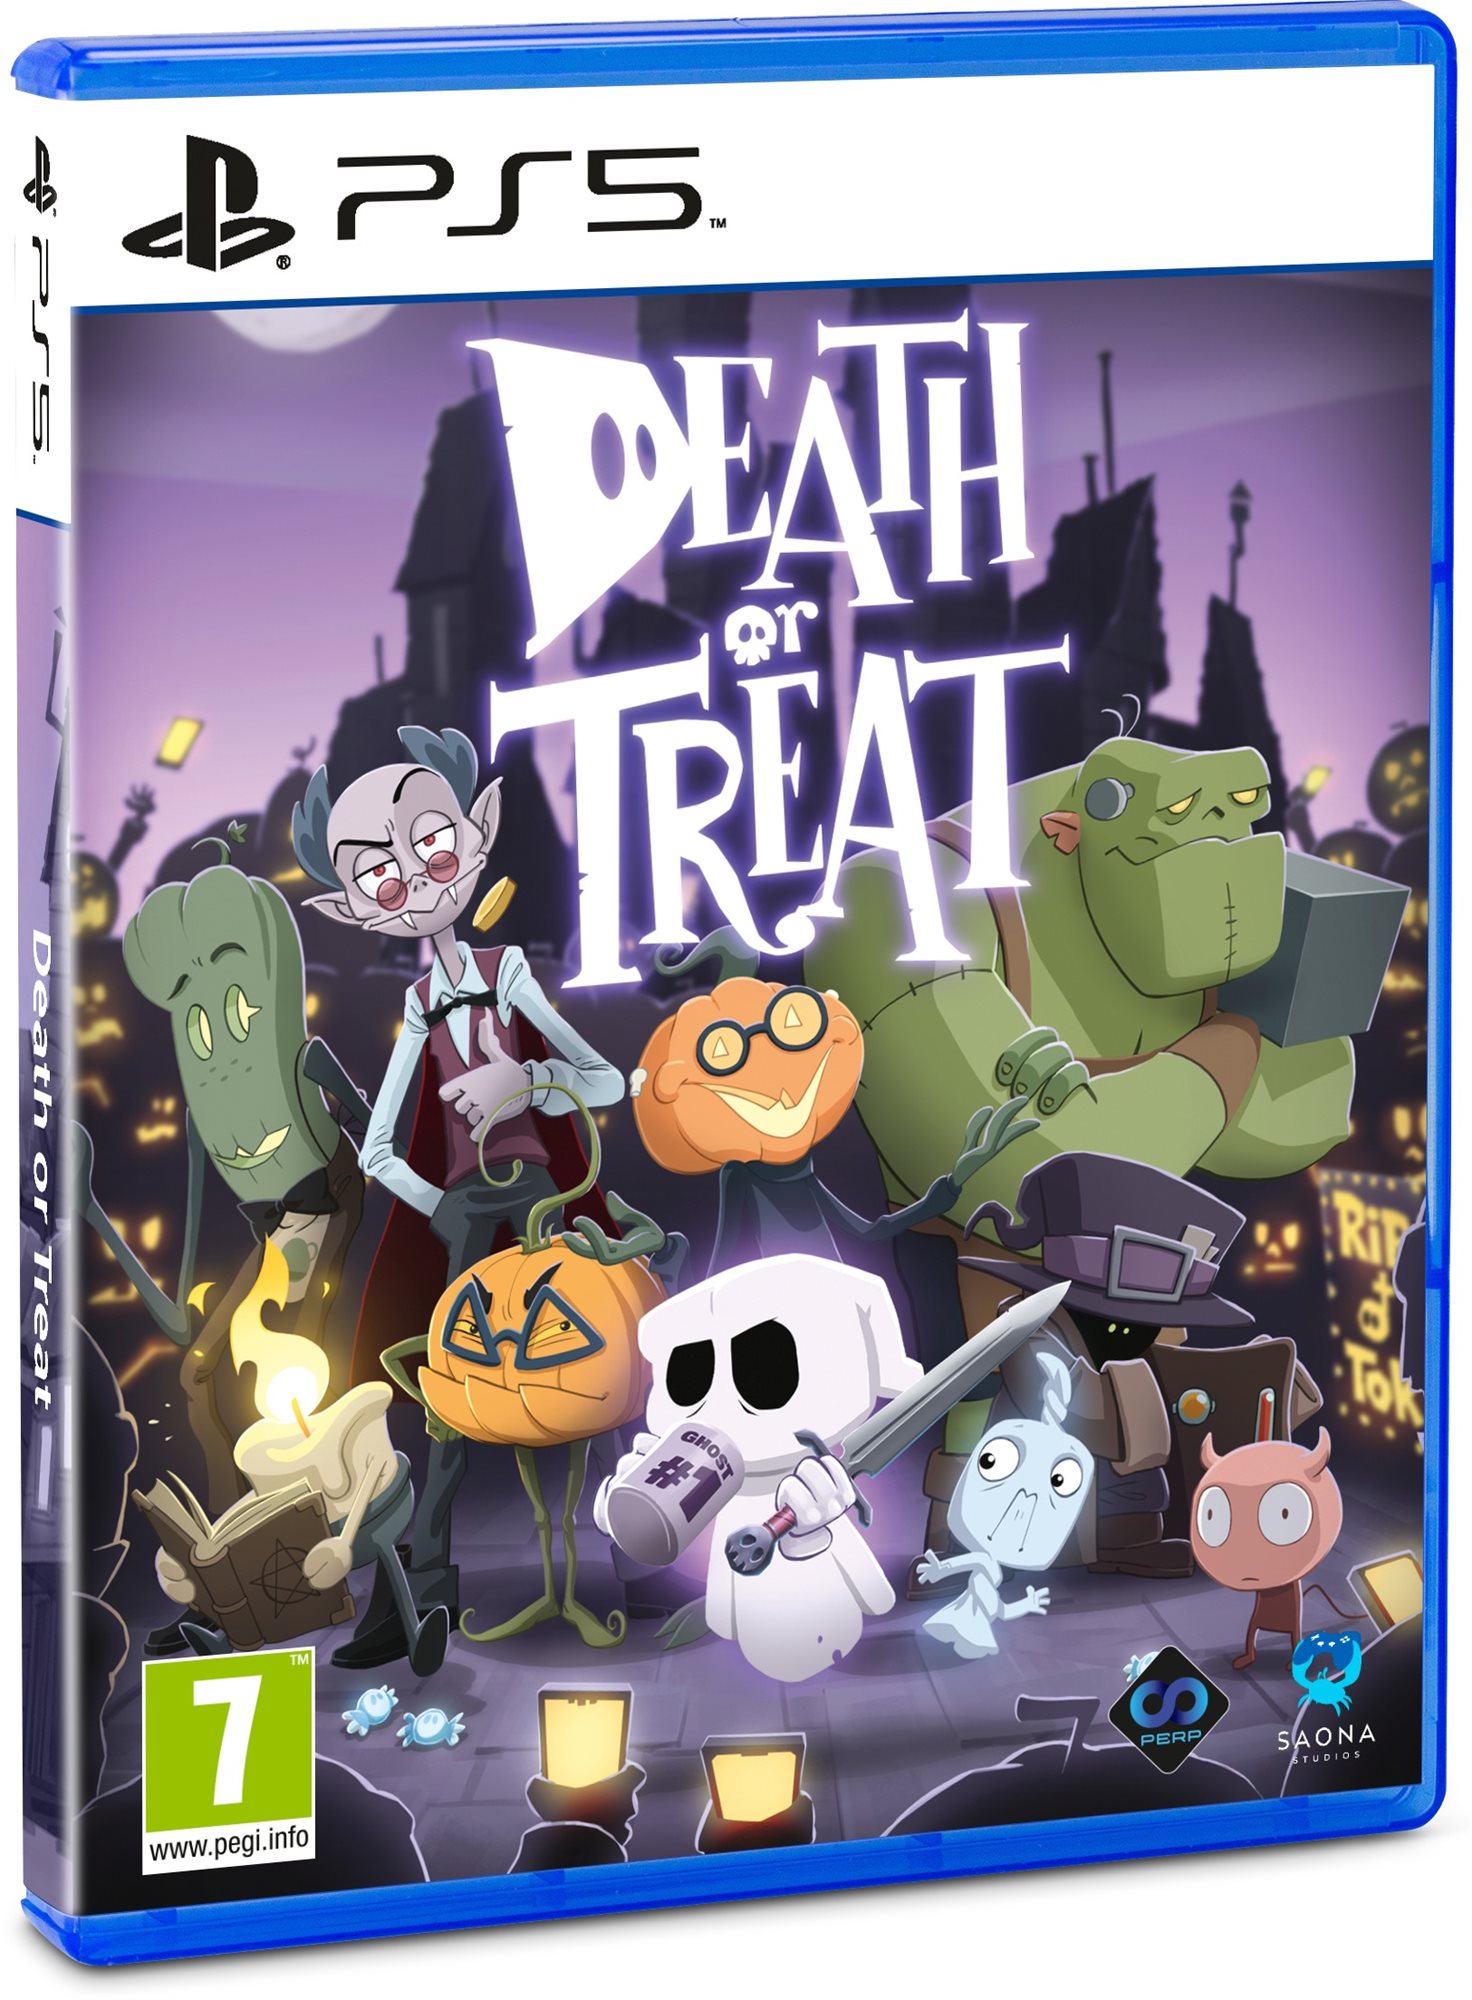 Death or Treat - PS5